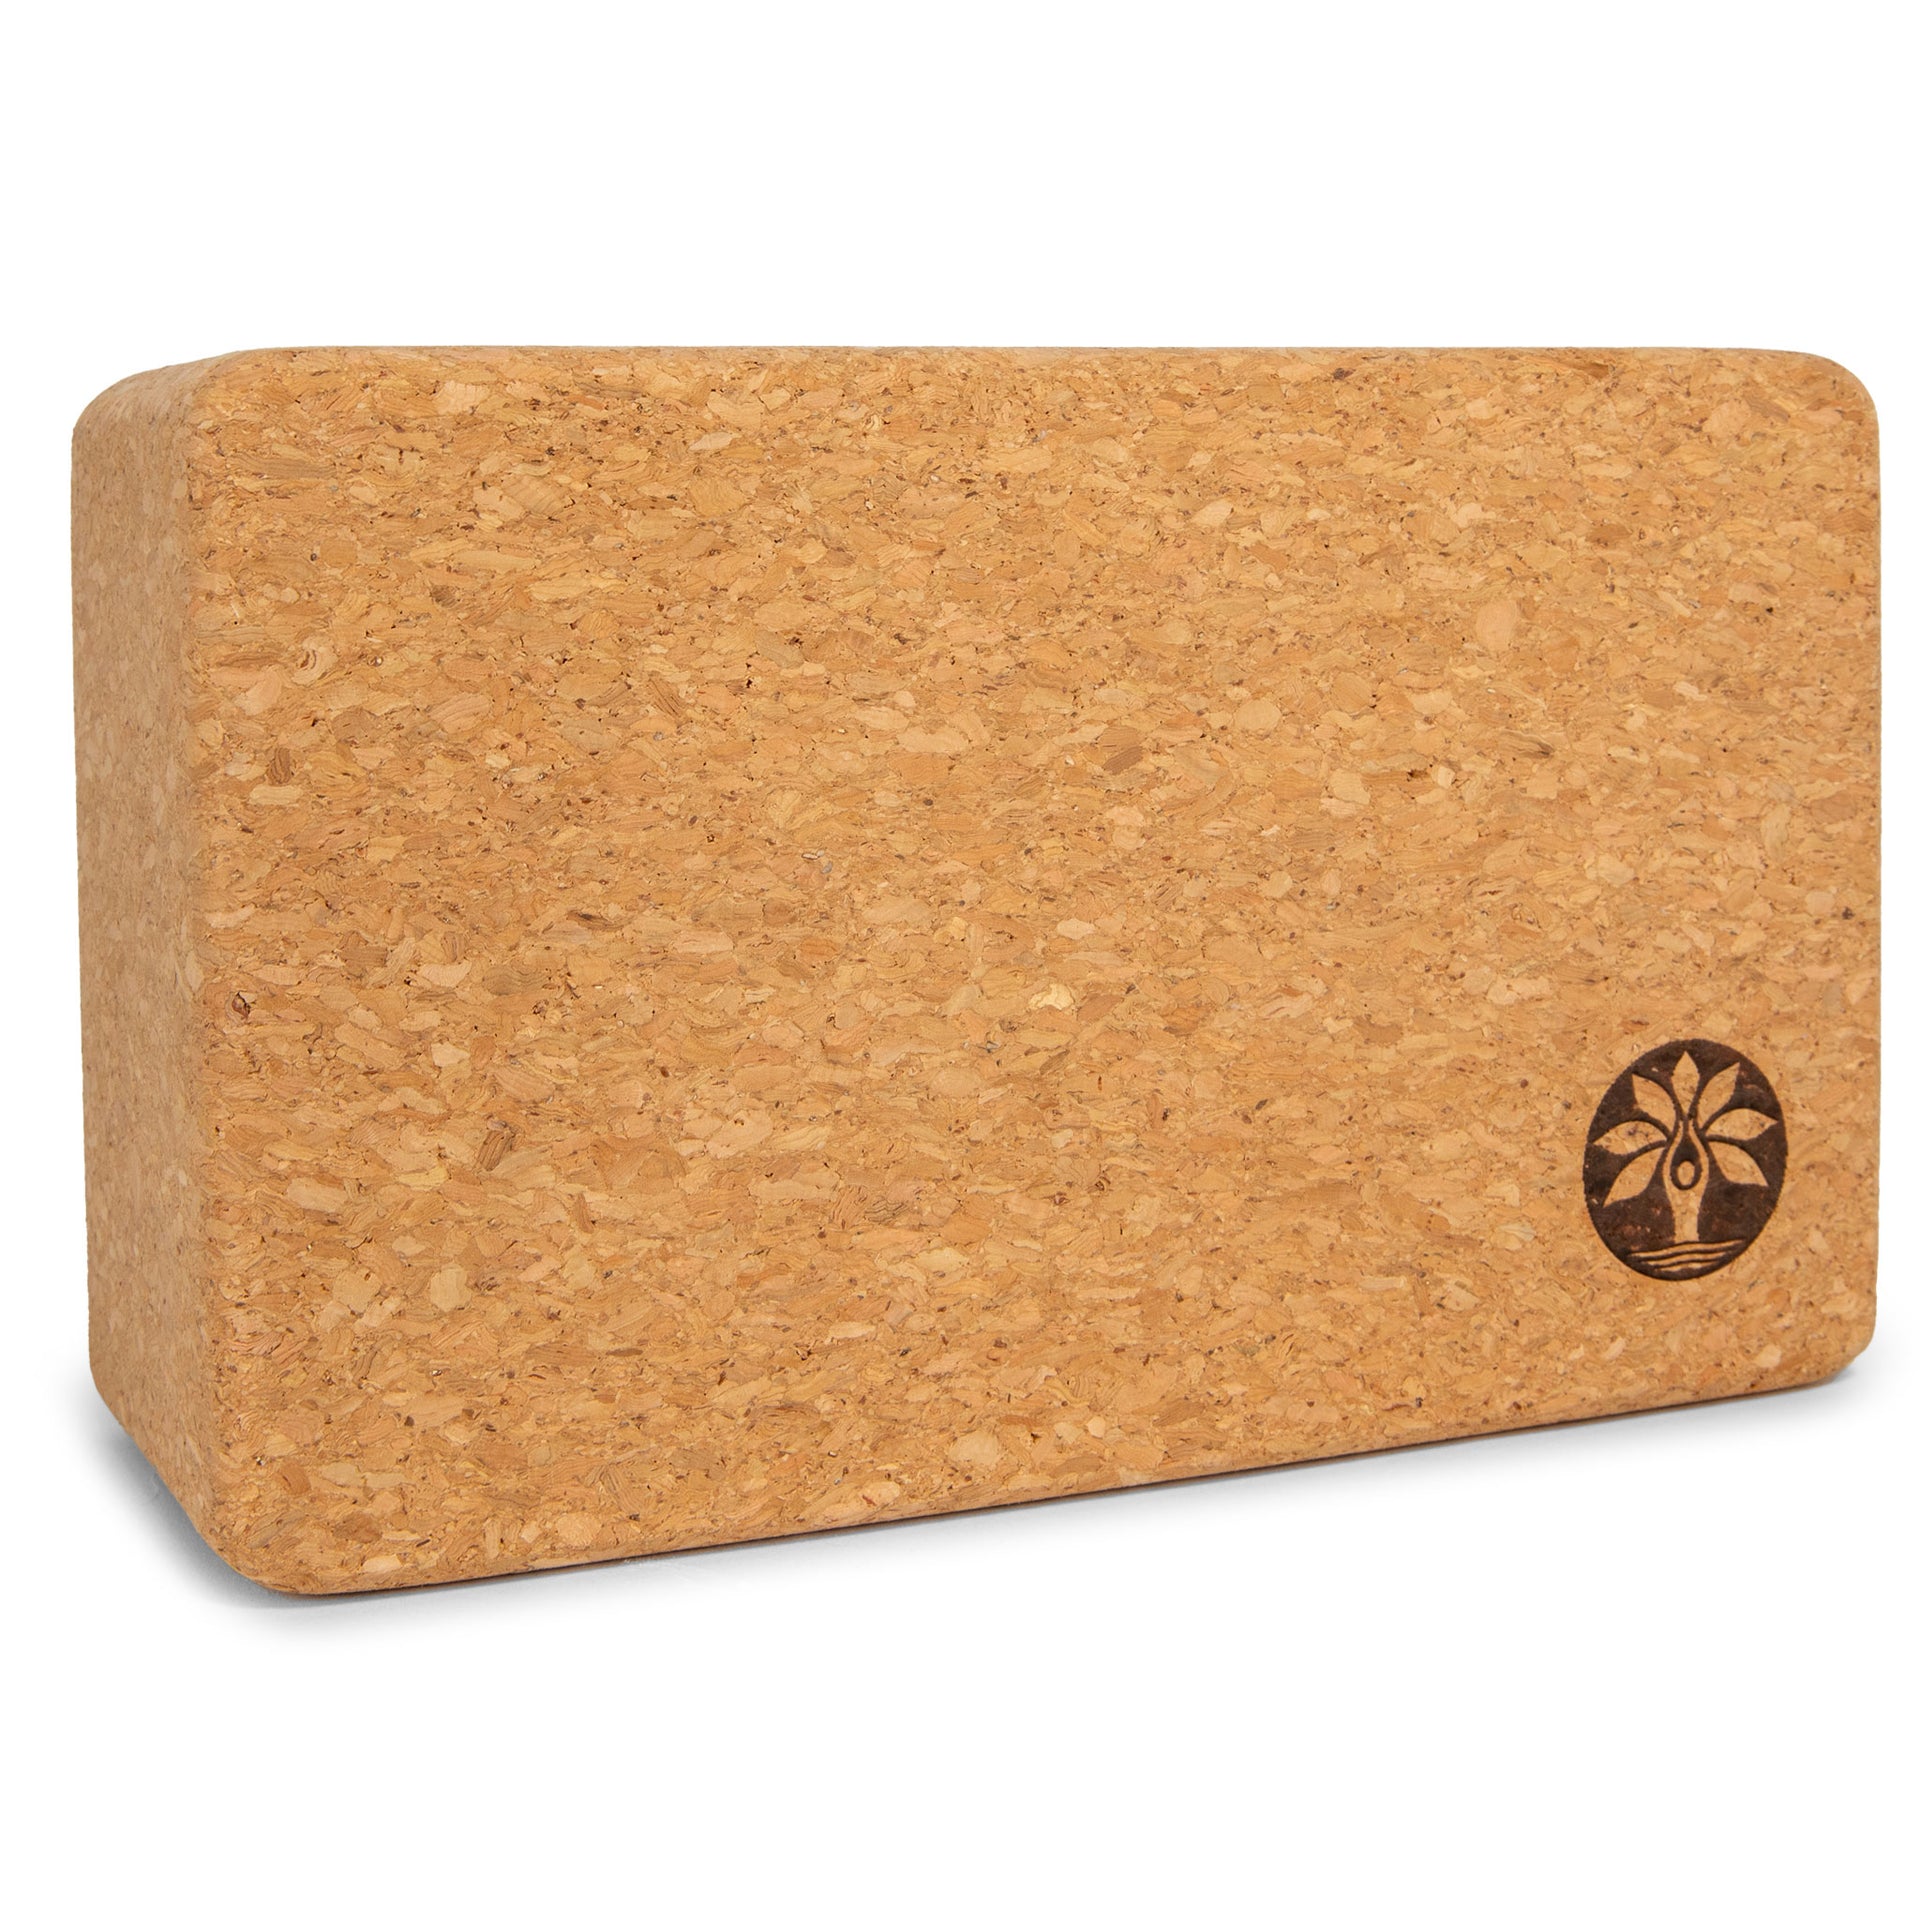 Yoga Brick Cork 100% made in Portugal + Free Delivery